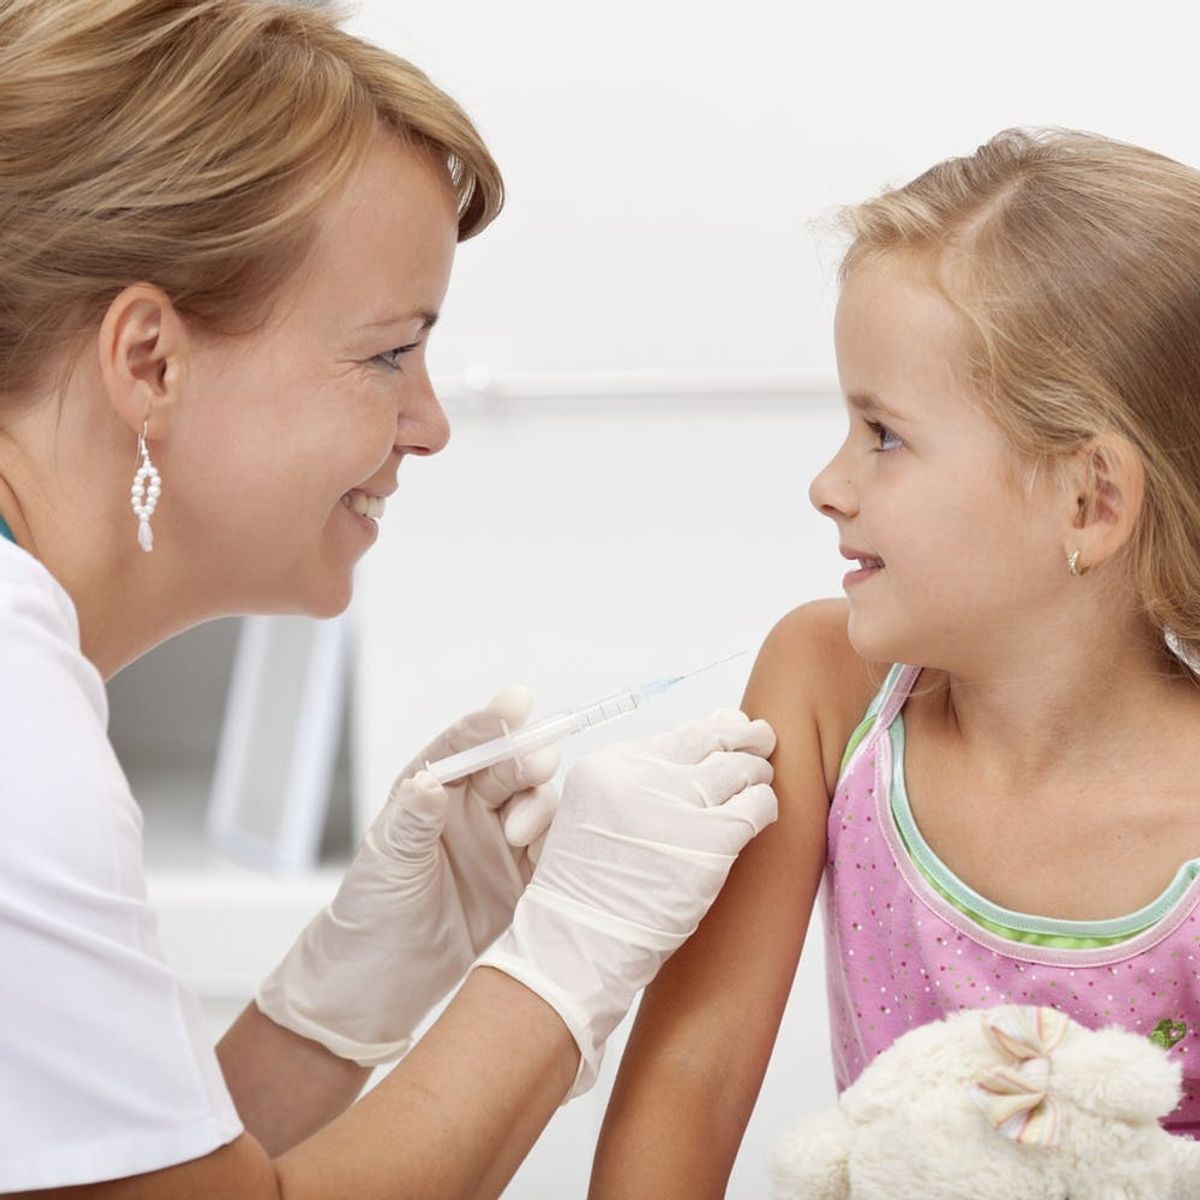 This Anti-Vaccination Mom Changed Her Mind After All 3 of Her Children Became Seriously Sick